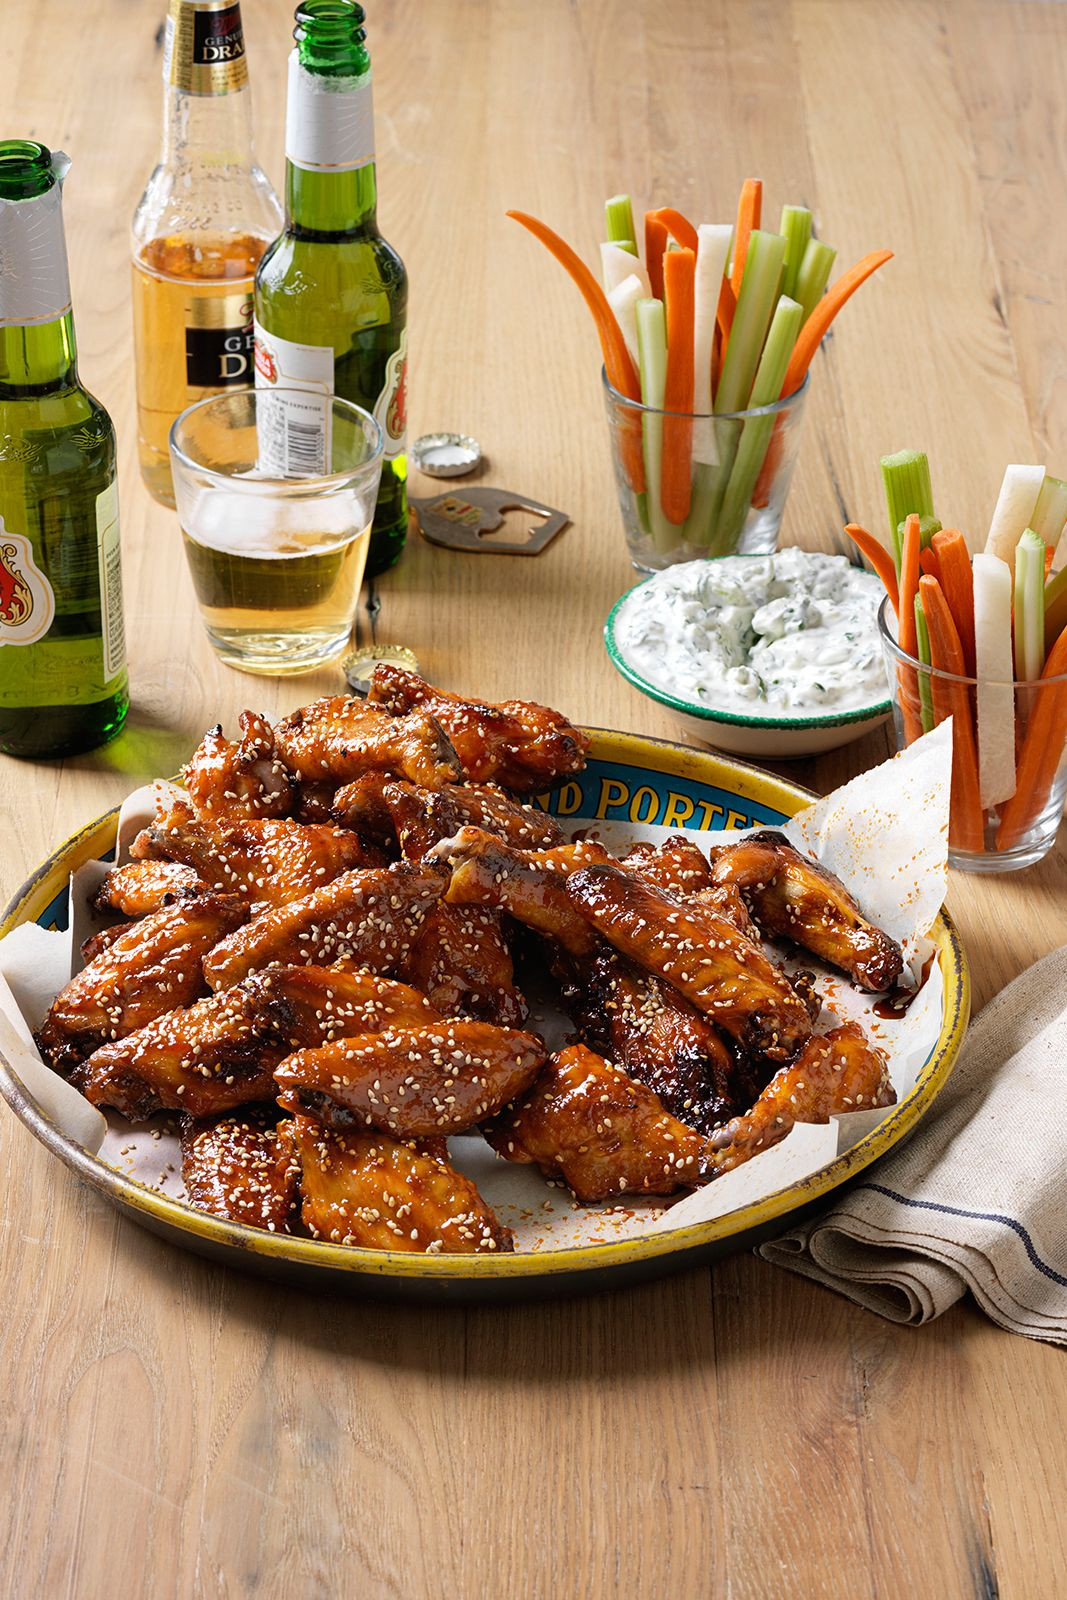 Super Bowl Chicken Wing Recipes
 PSA You Can Make Your Super Bowl Chicken Wings in an